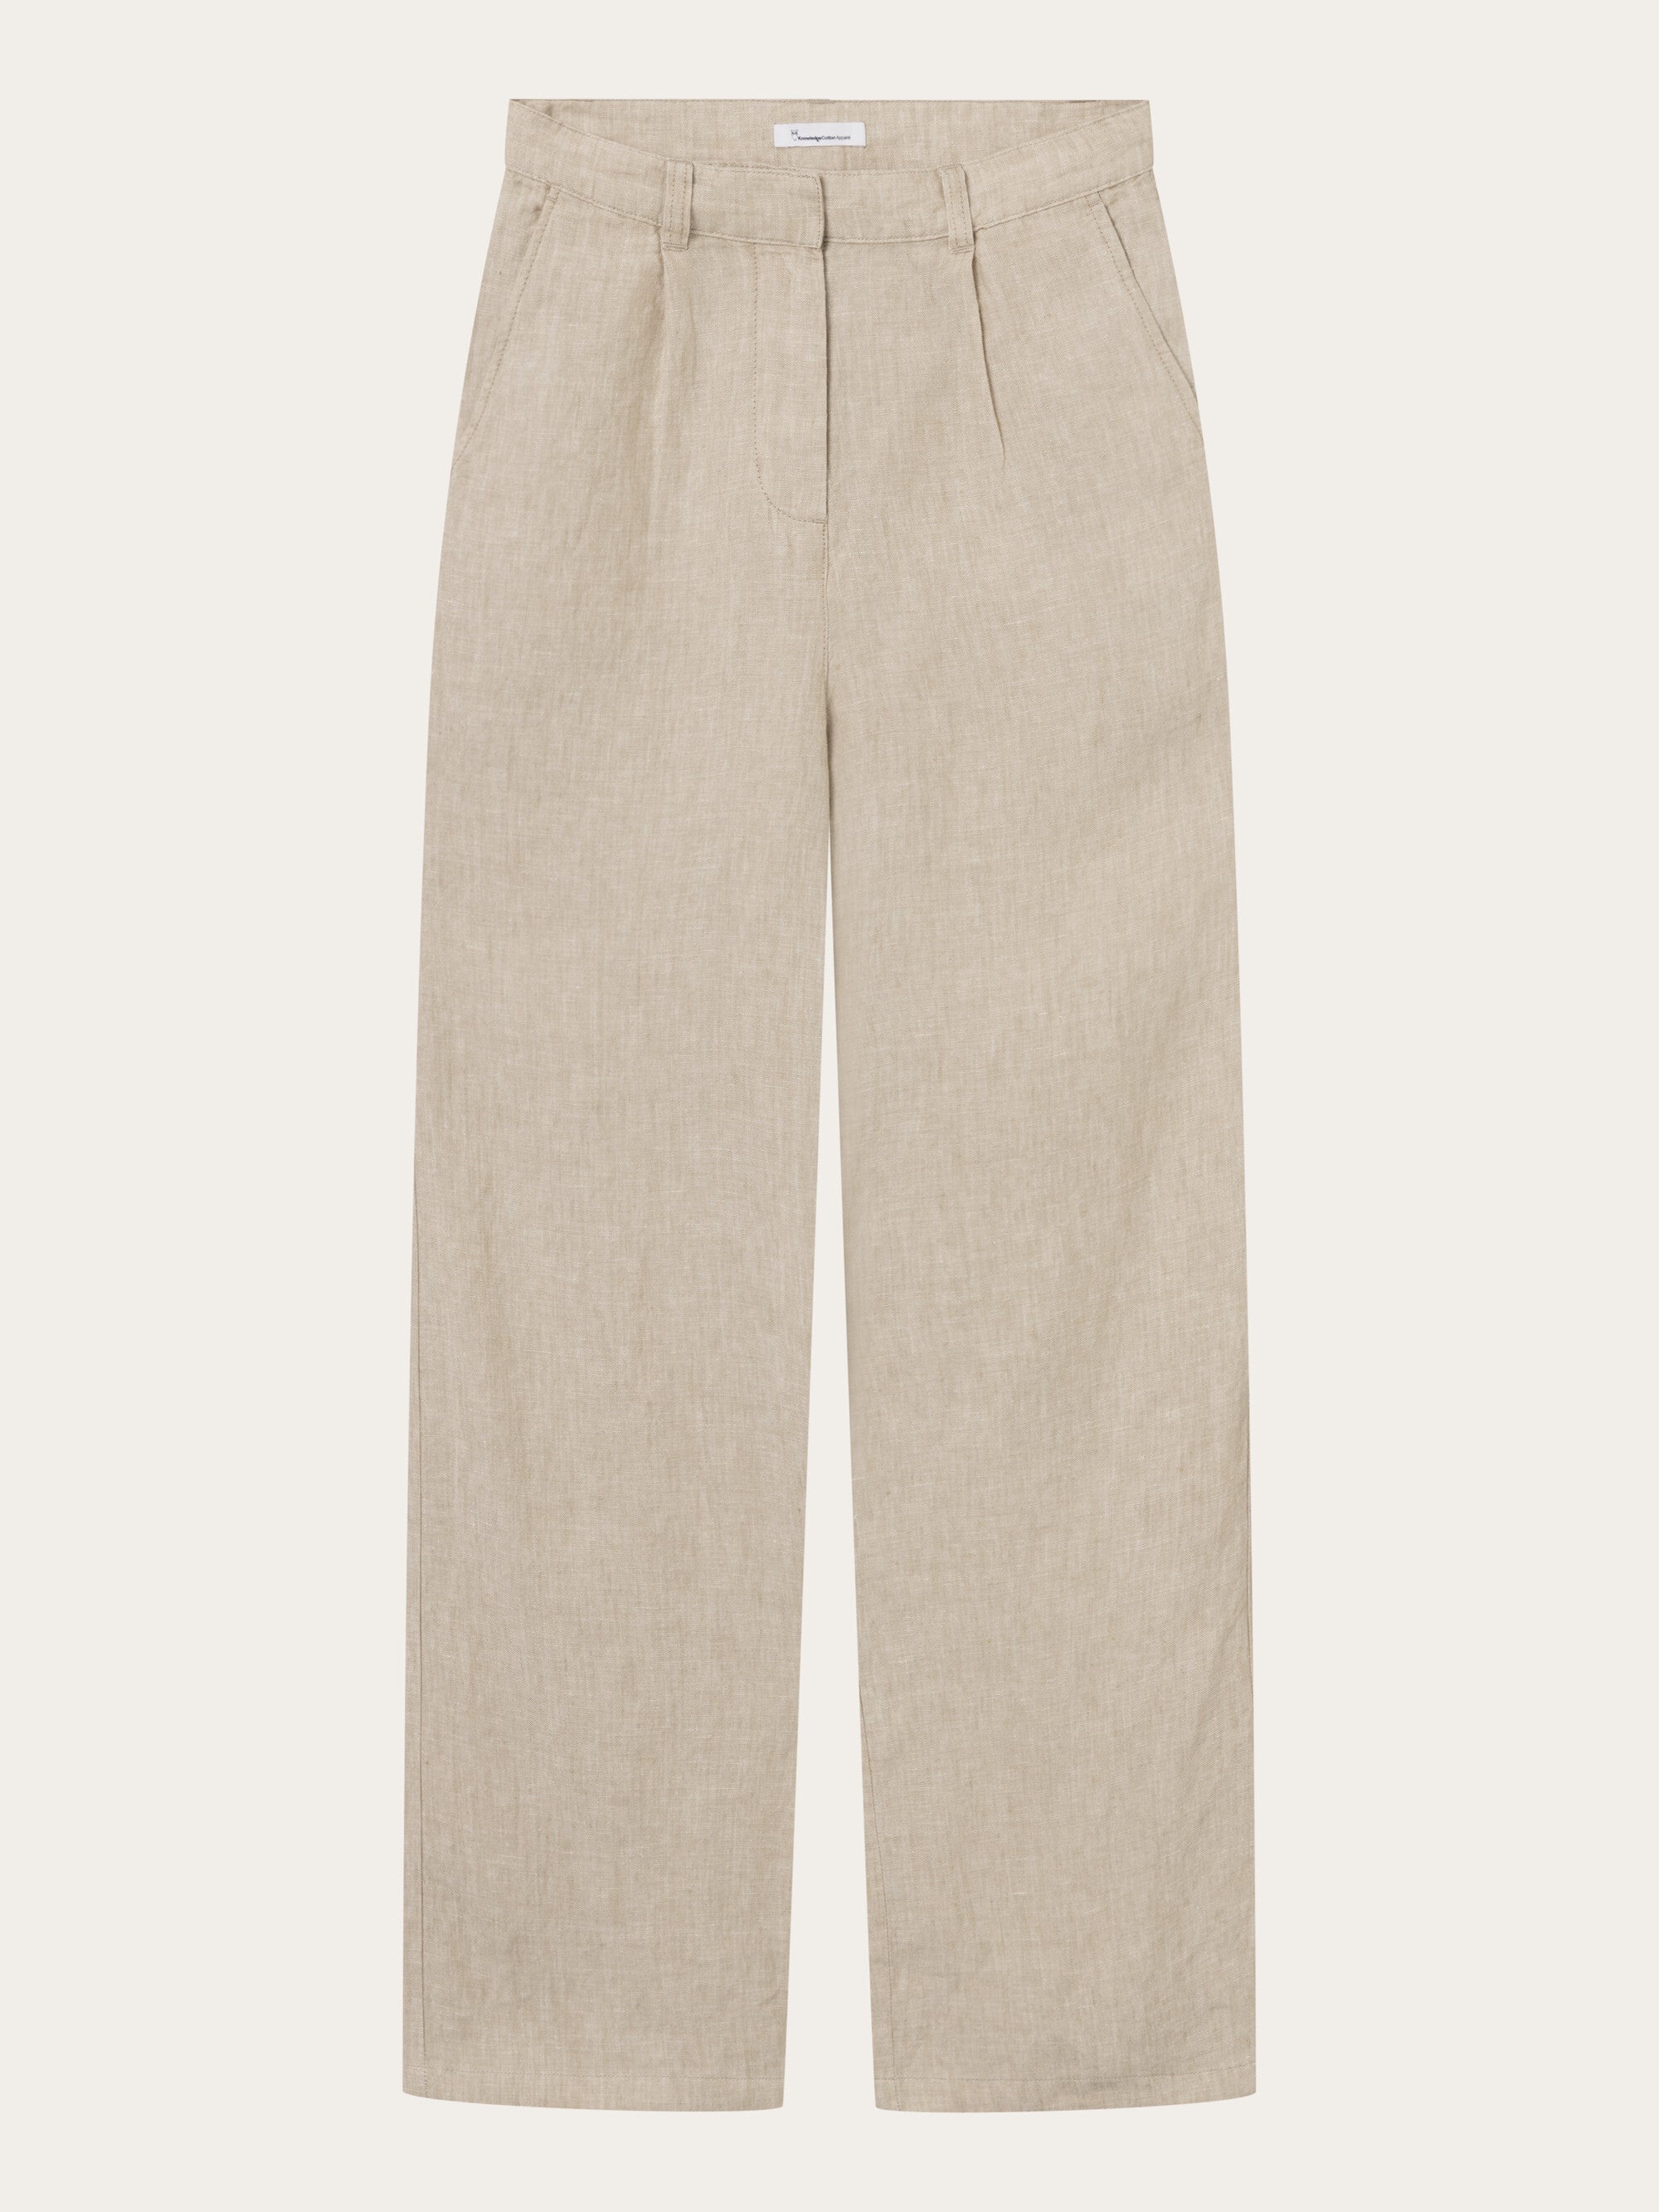 Buy Loose natural linen pants - Light feather gray - from ...